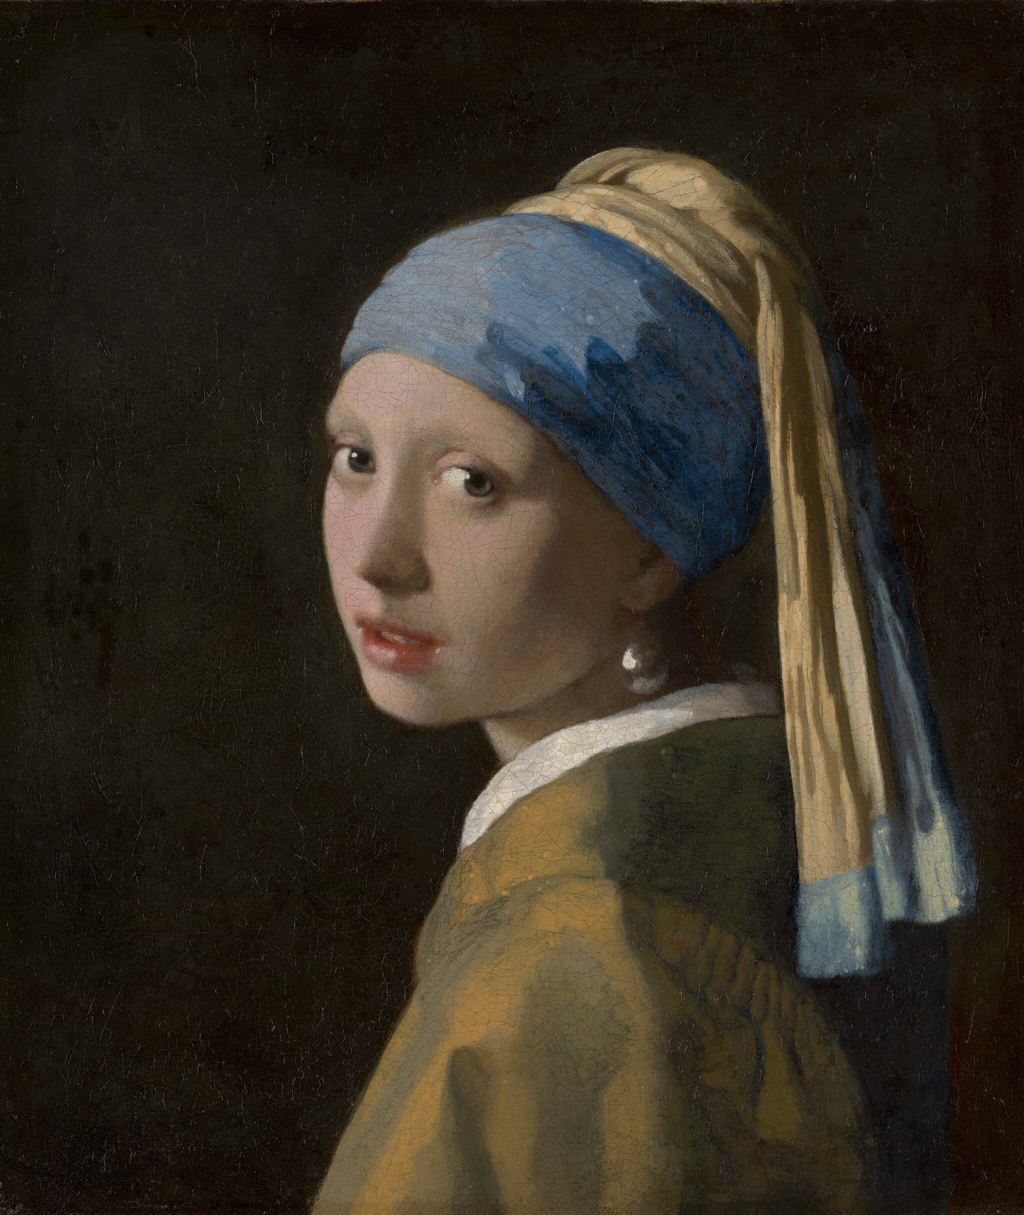 The Girl with a Pearl Earring, Johannes Vermeer, 1665, Mauritshuis, The Hague